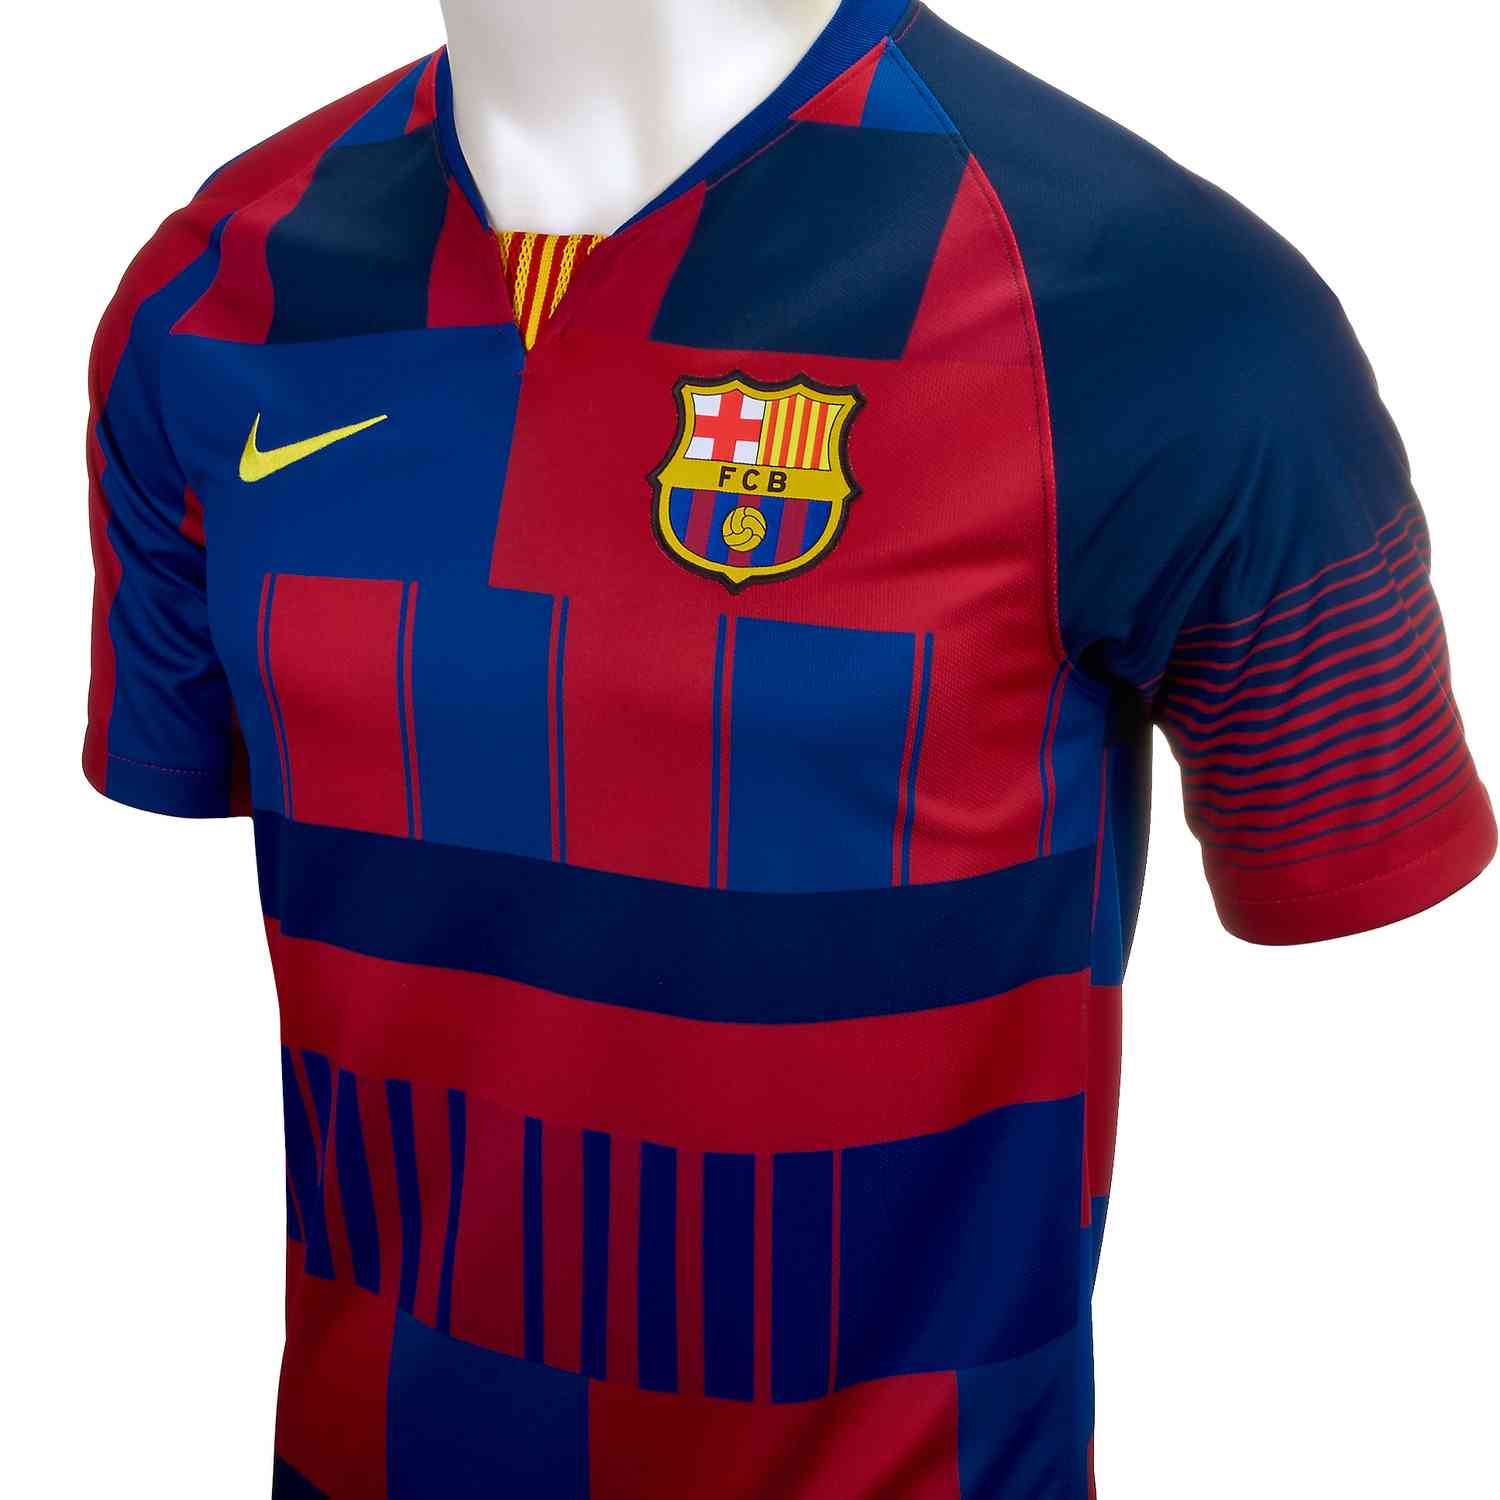 Barca Jersey - Shop for Barcelona Latest Jerseys, Hoodie & Much More